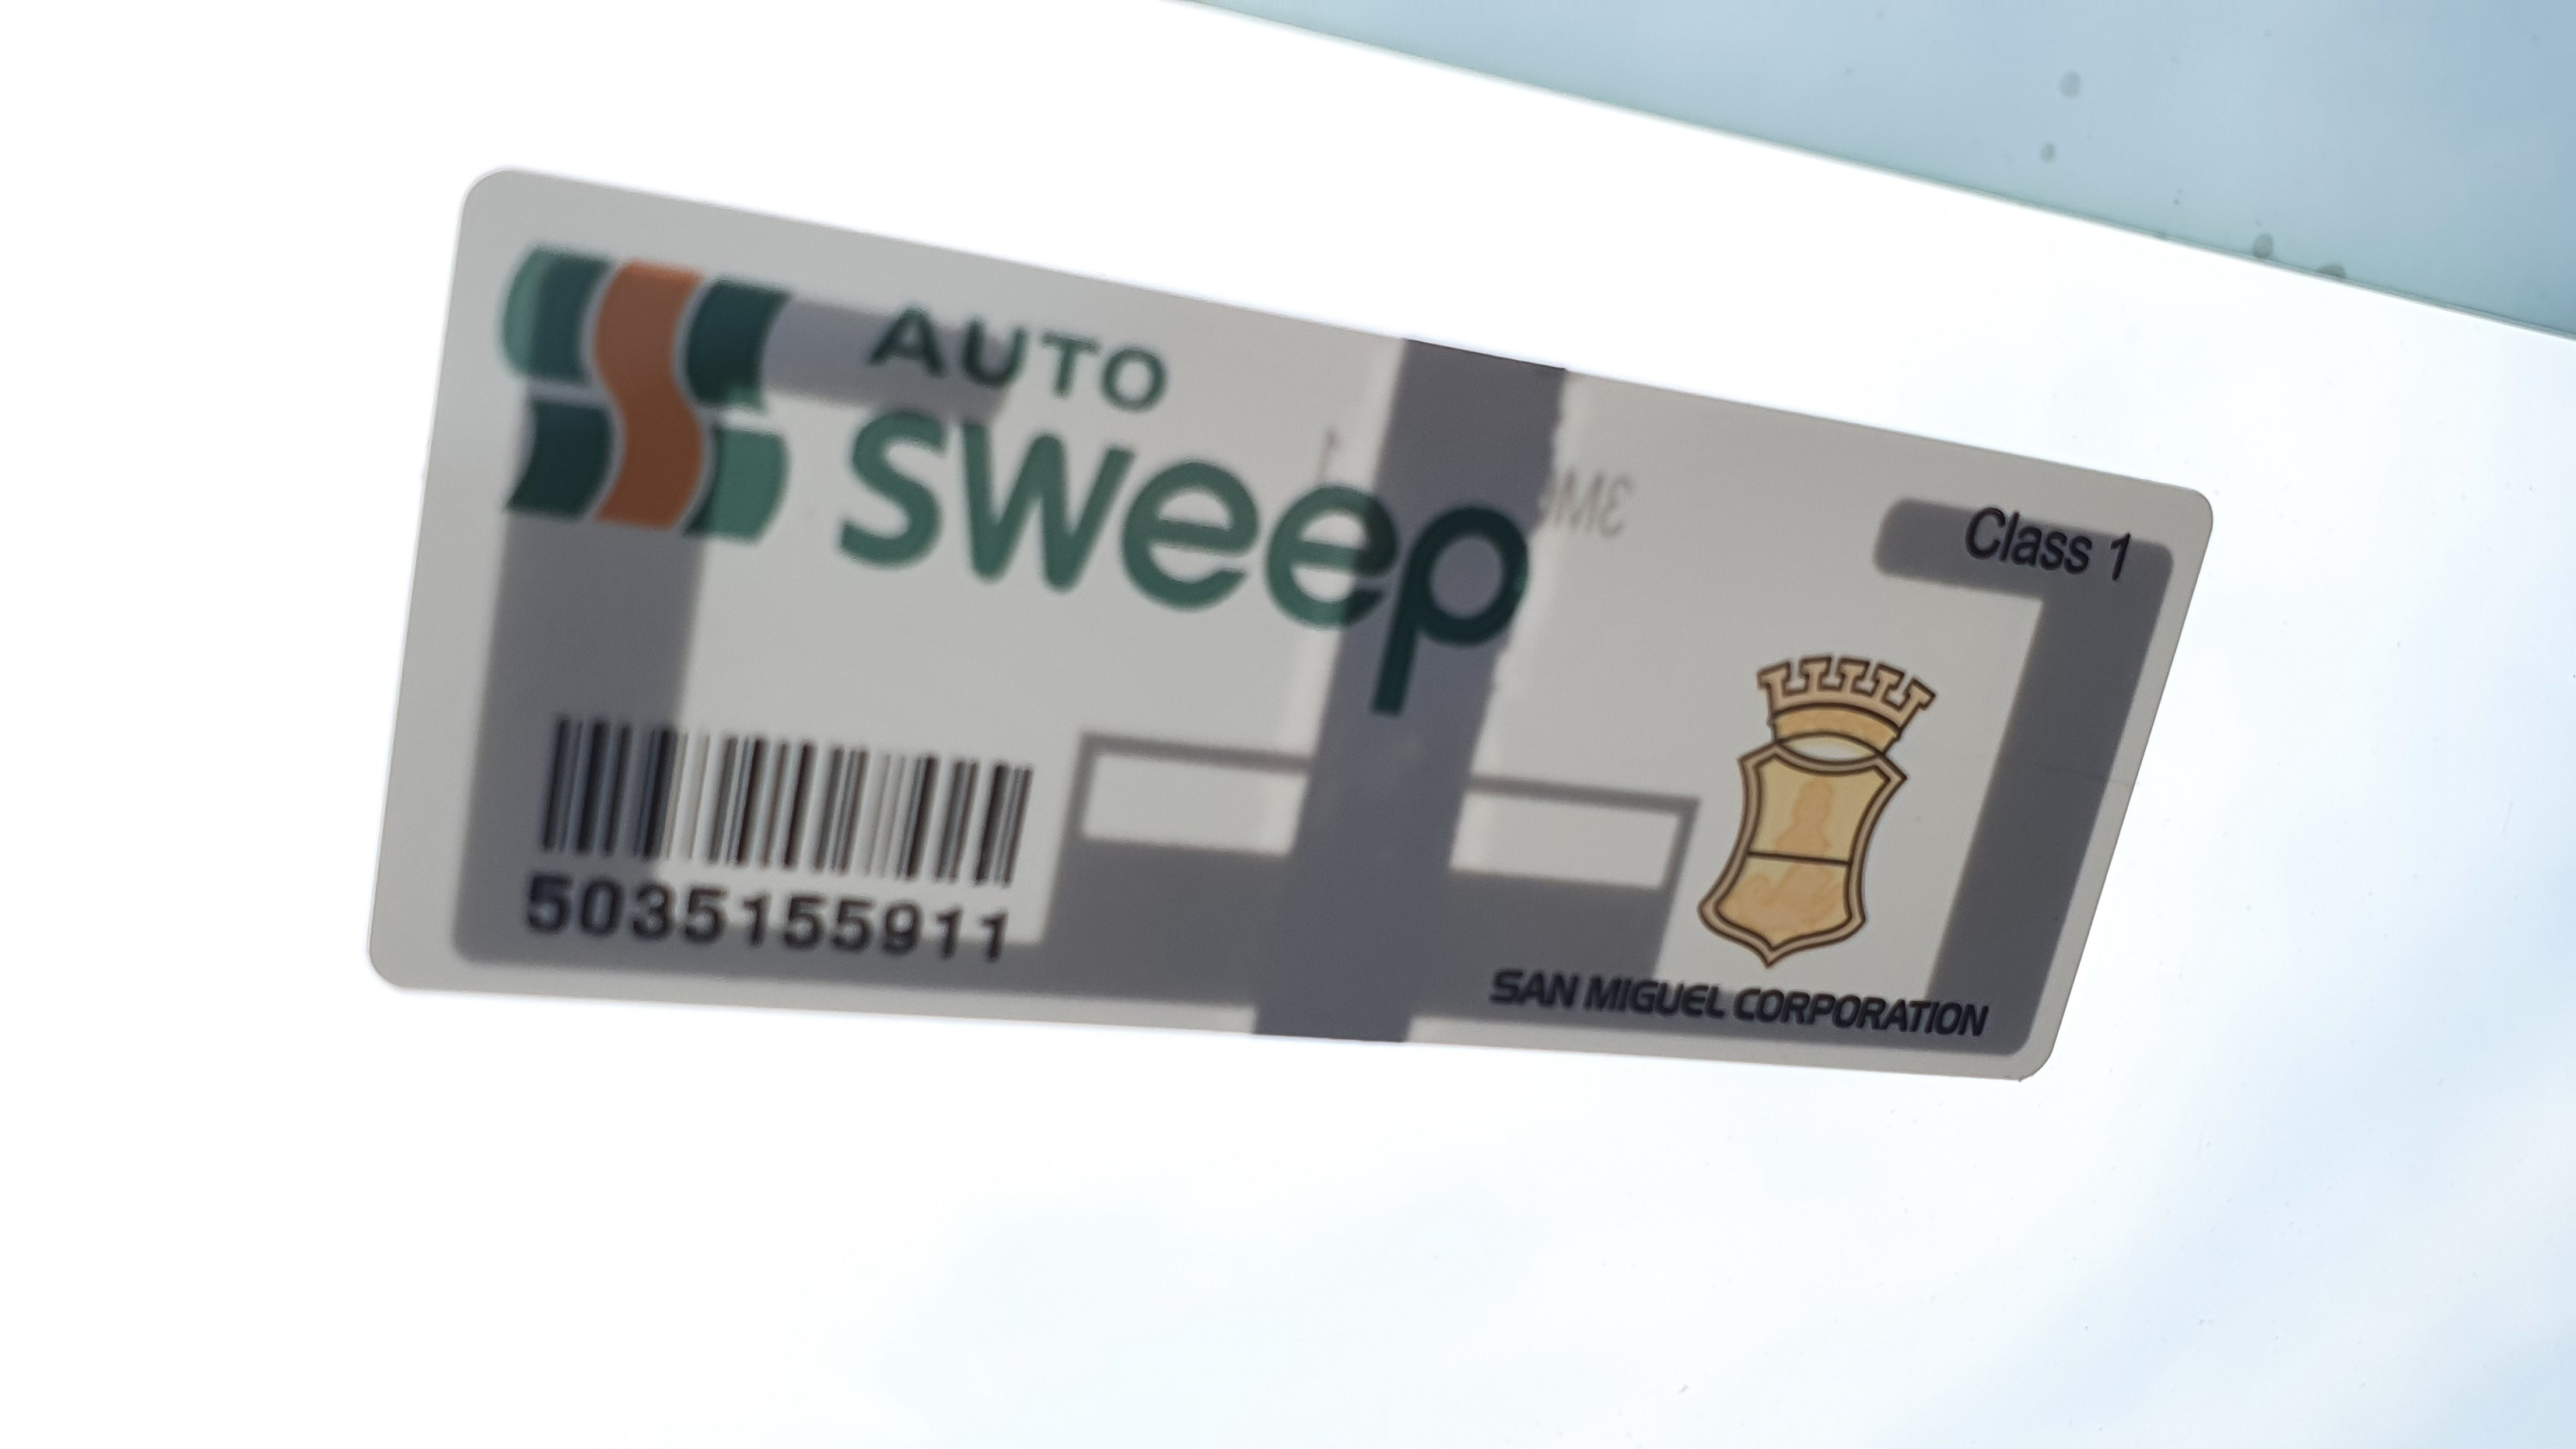 how to reload autosweep, reloading autosweep rfid, autosweep rfid reload guide, autosweep reload guide, how to reload your autosweep account